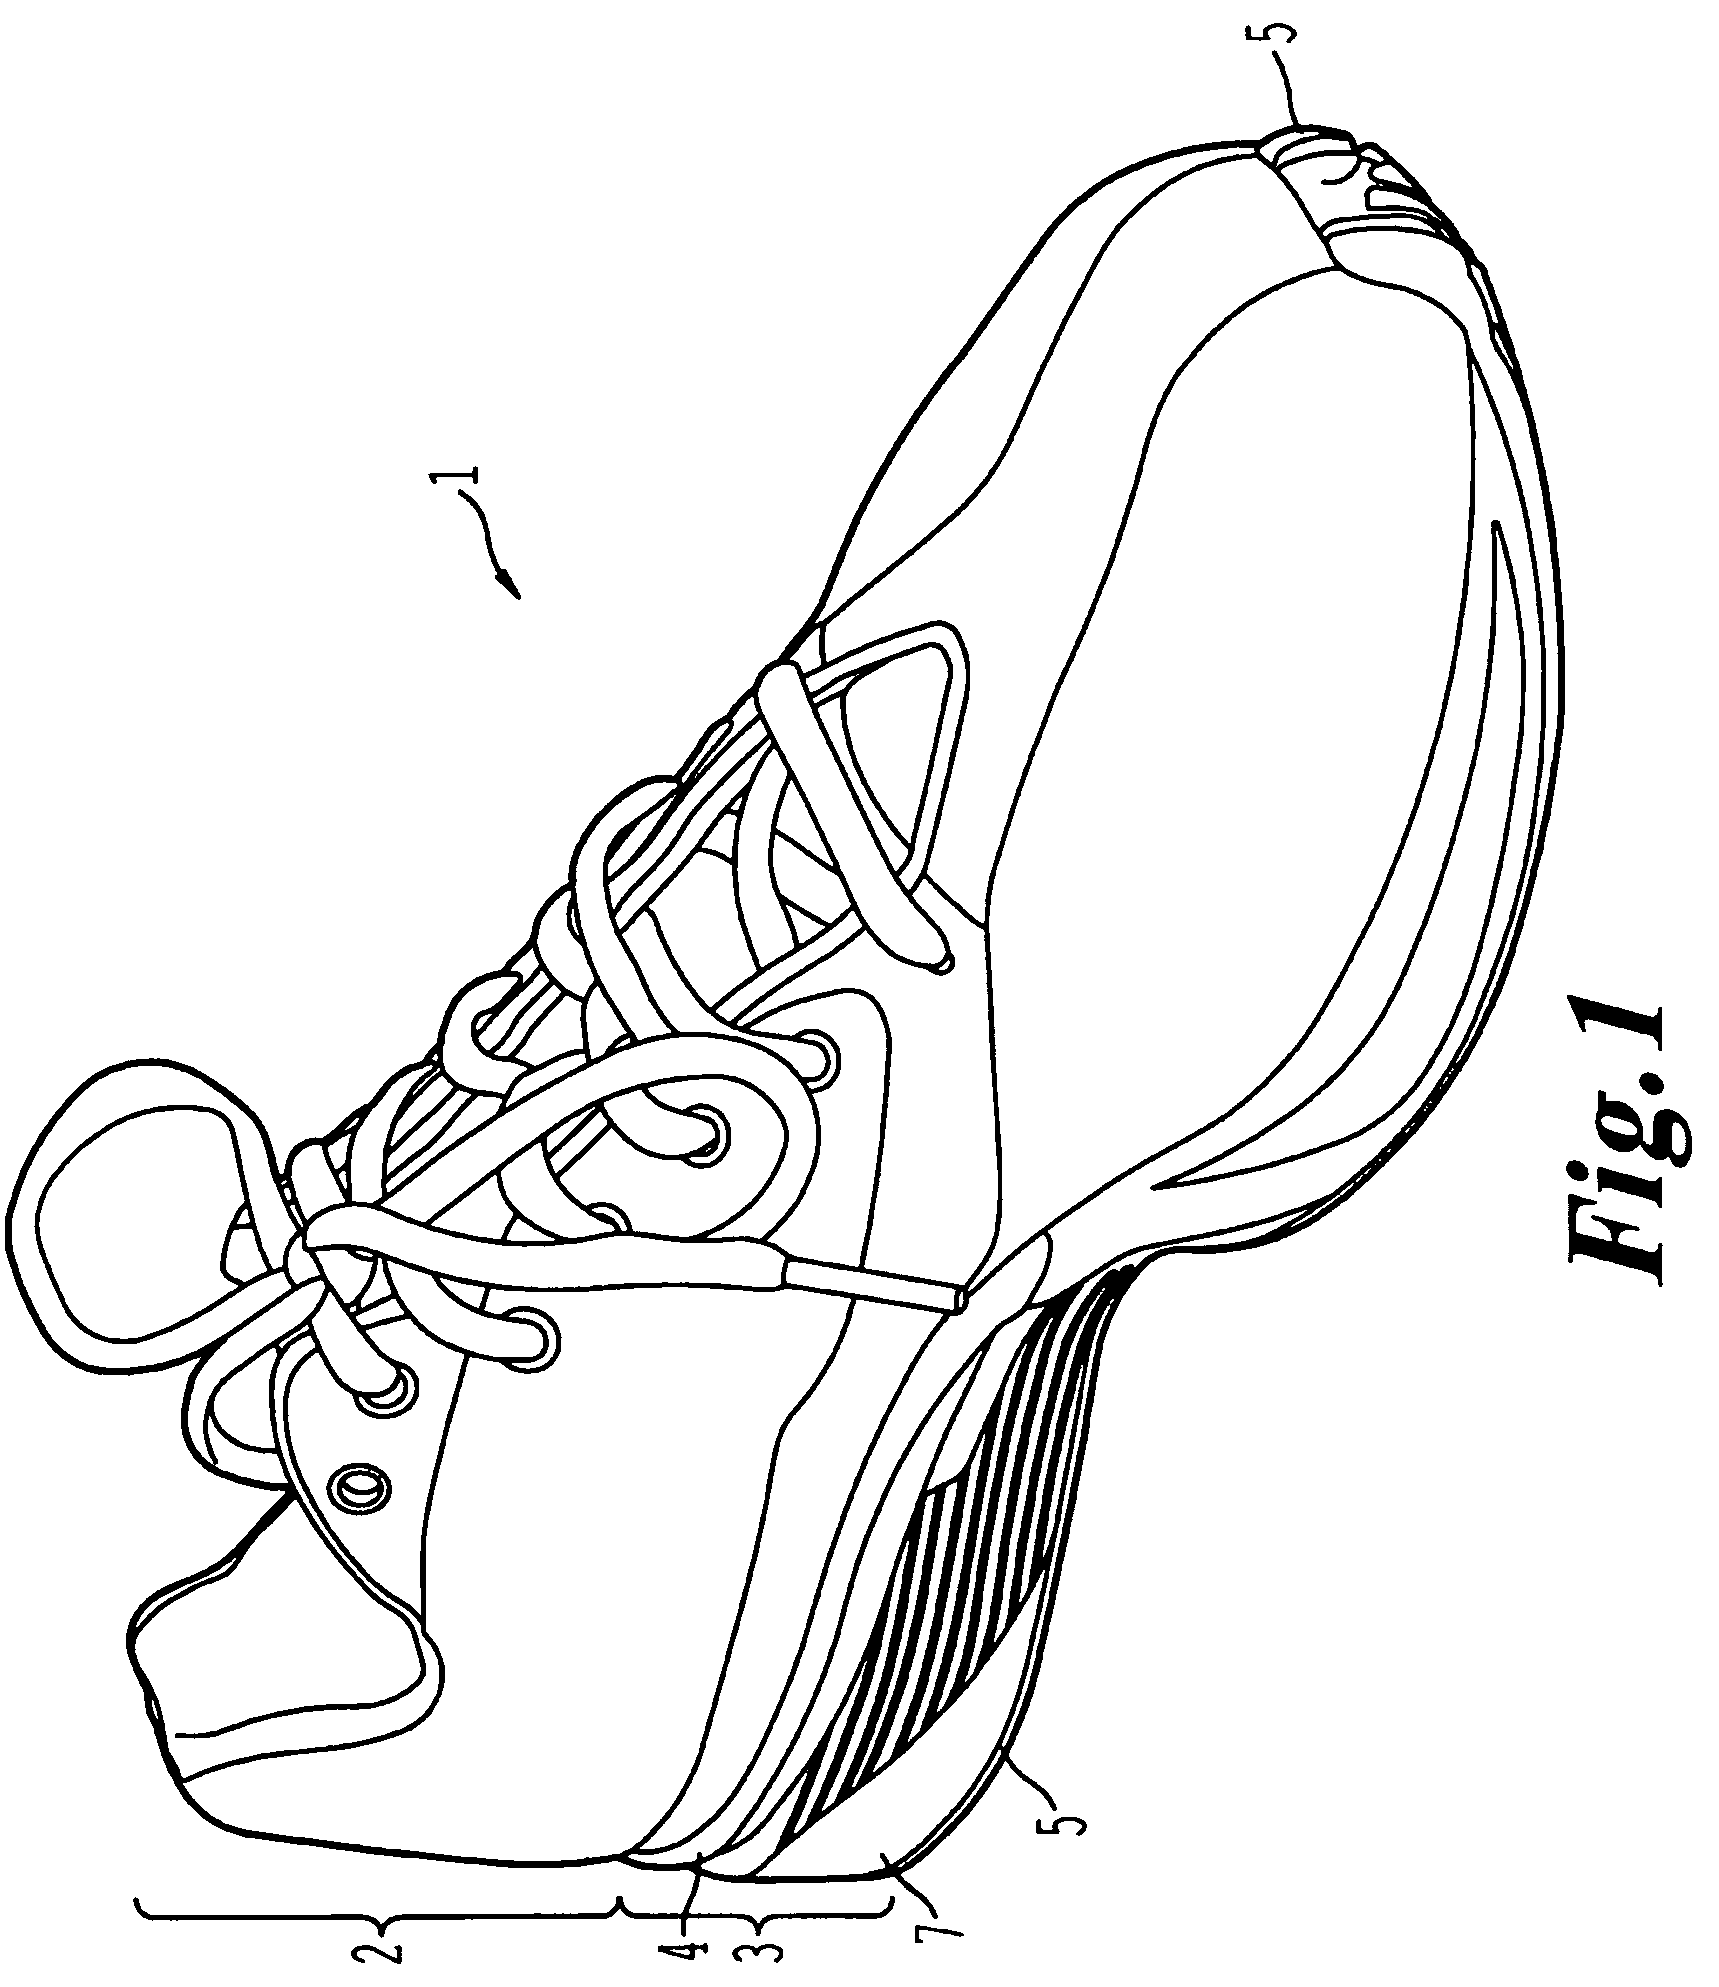 Enhanced sole assembly with offset hole